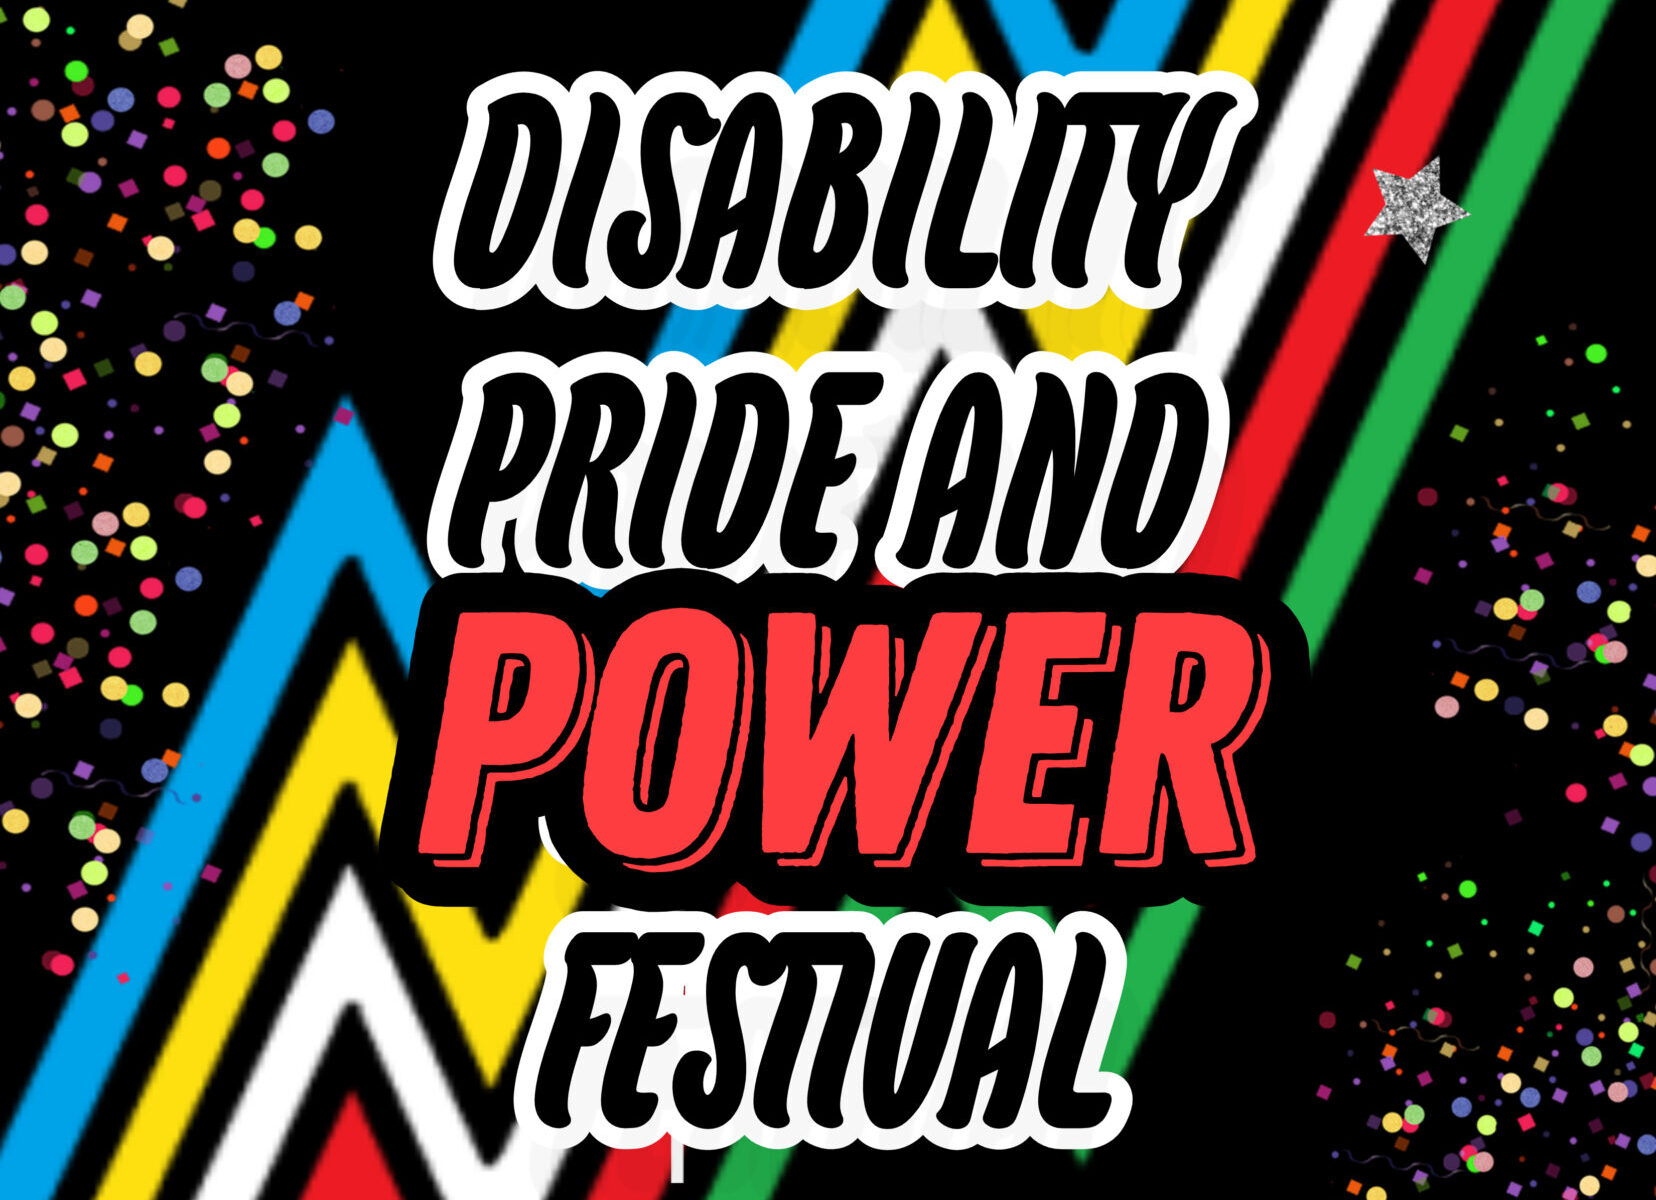 Image shows the disability pride flag against a black and confetti background with the words "Disability Pride and Power Festival- July 1-29, 2022"